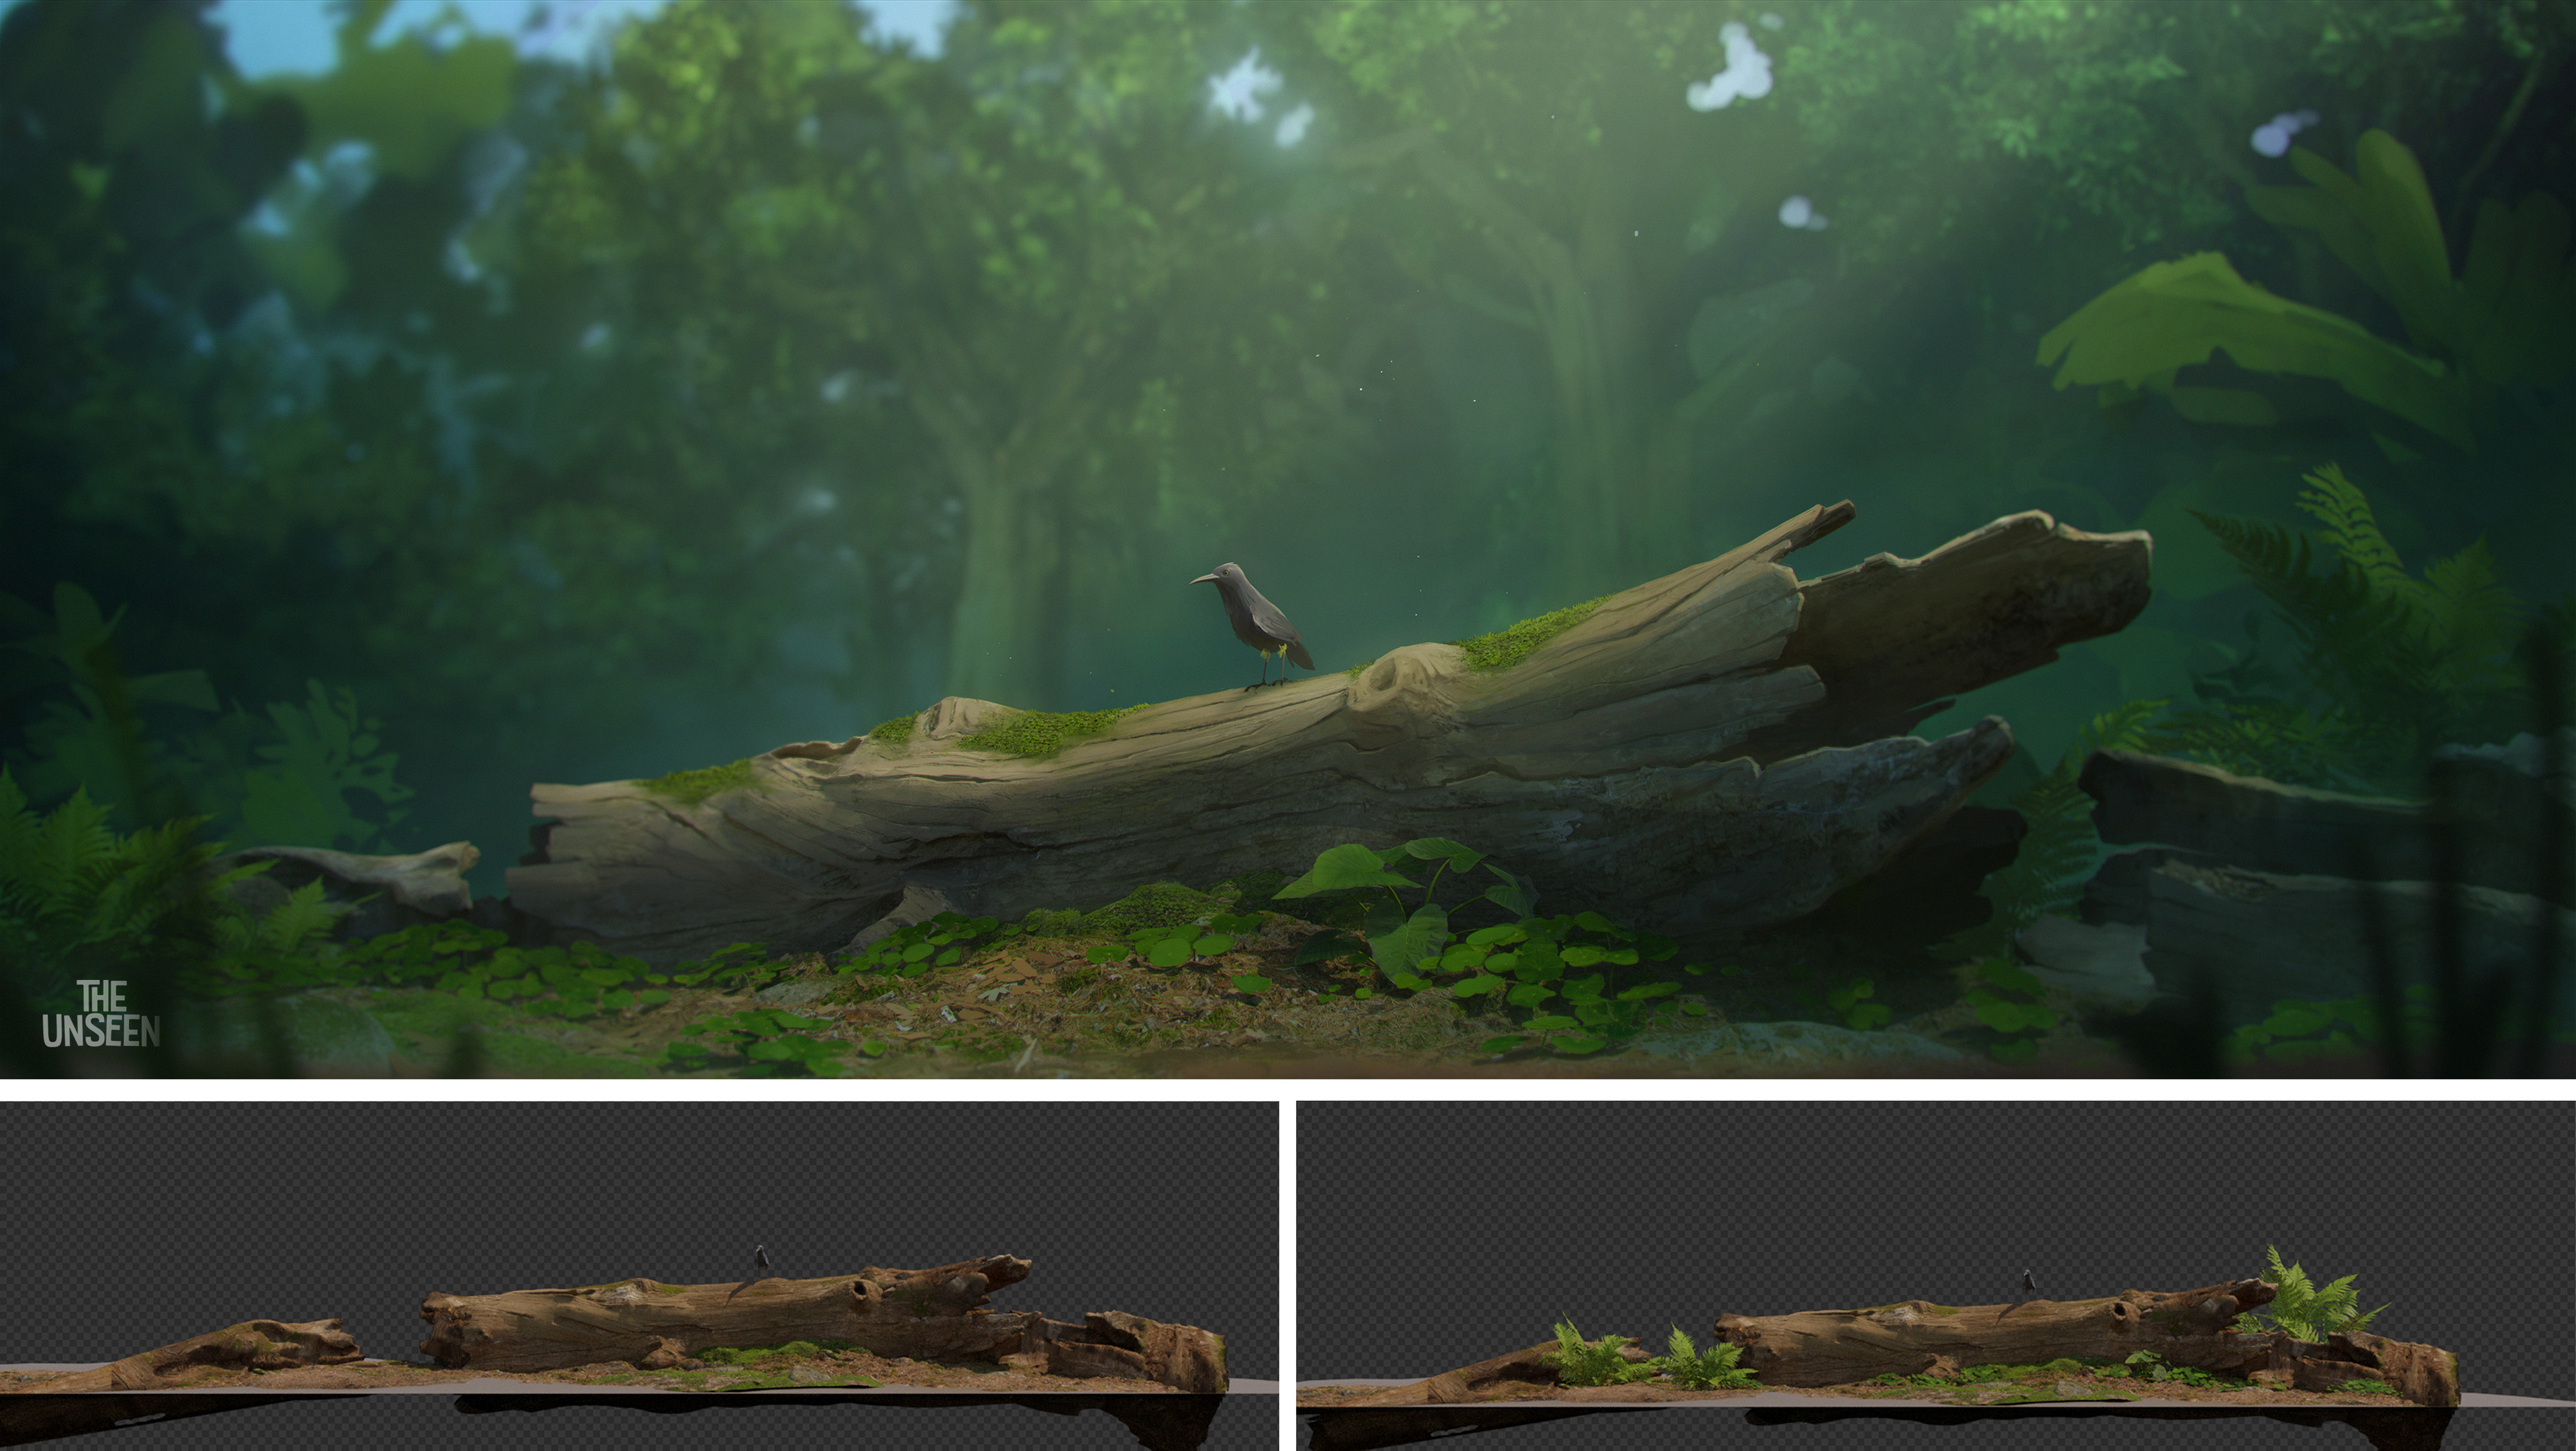 Pre-production art - Dead tree shot

In order to help the modelling department stay as close as possible to the shape of the tree presented in the art, I created a proxy model to share with the team.